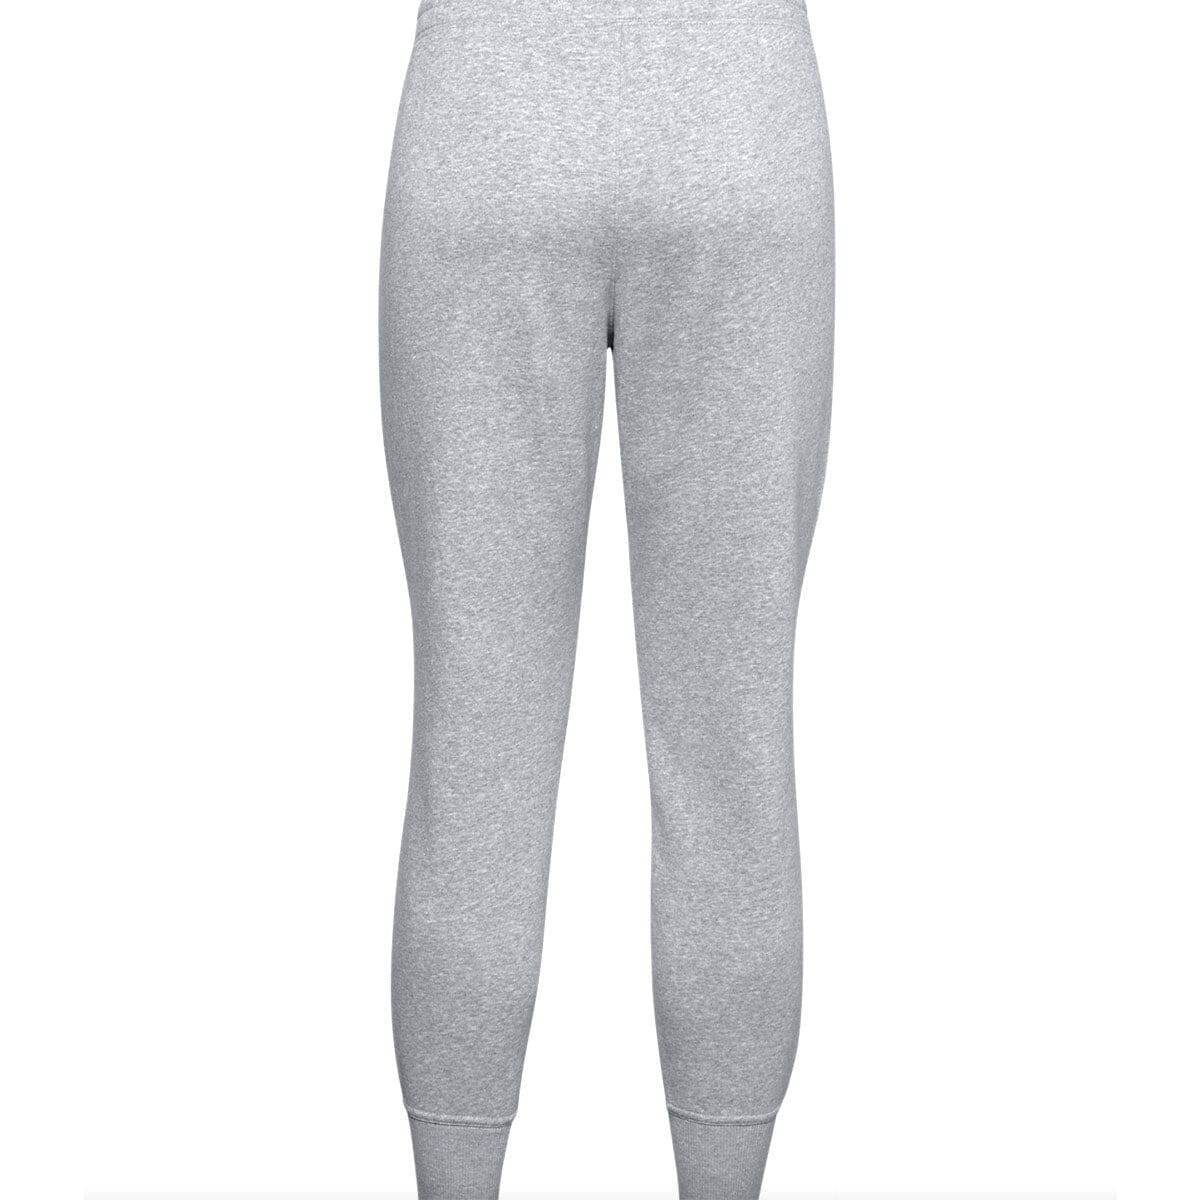 Women's Rival Fleece Joggers from Under Armour